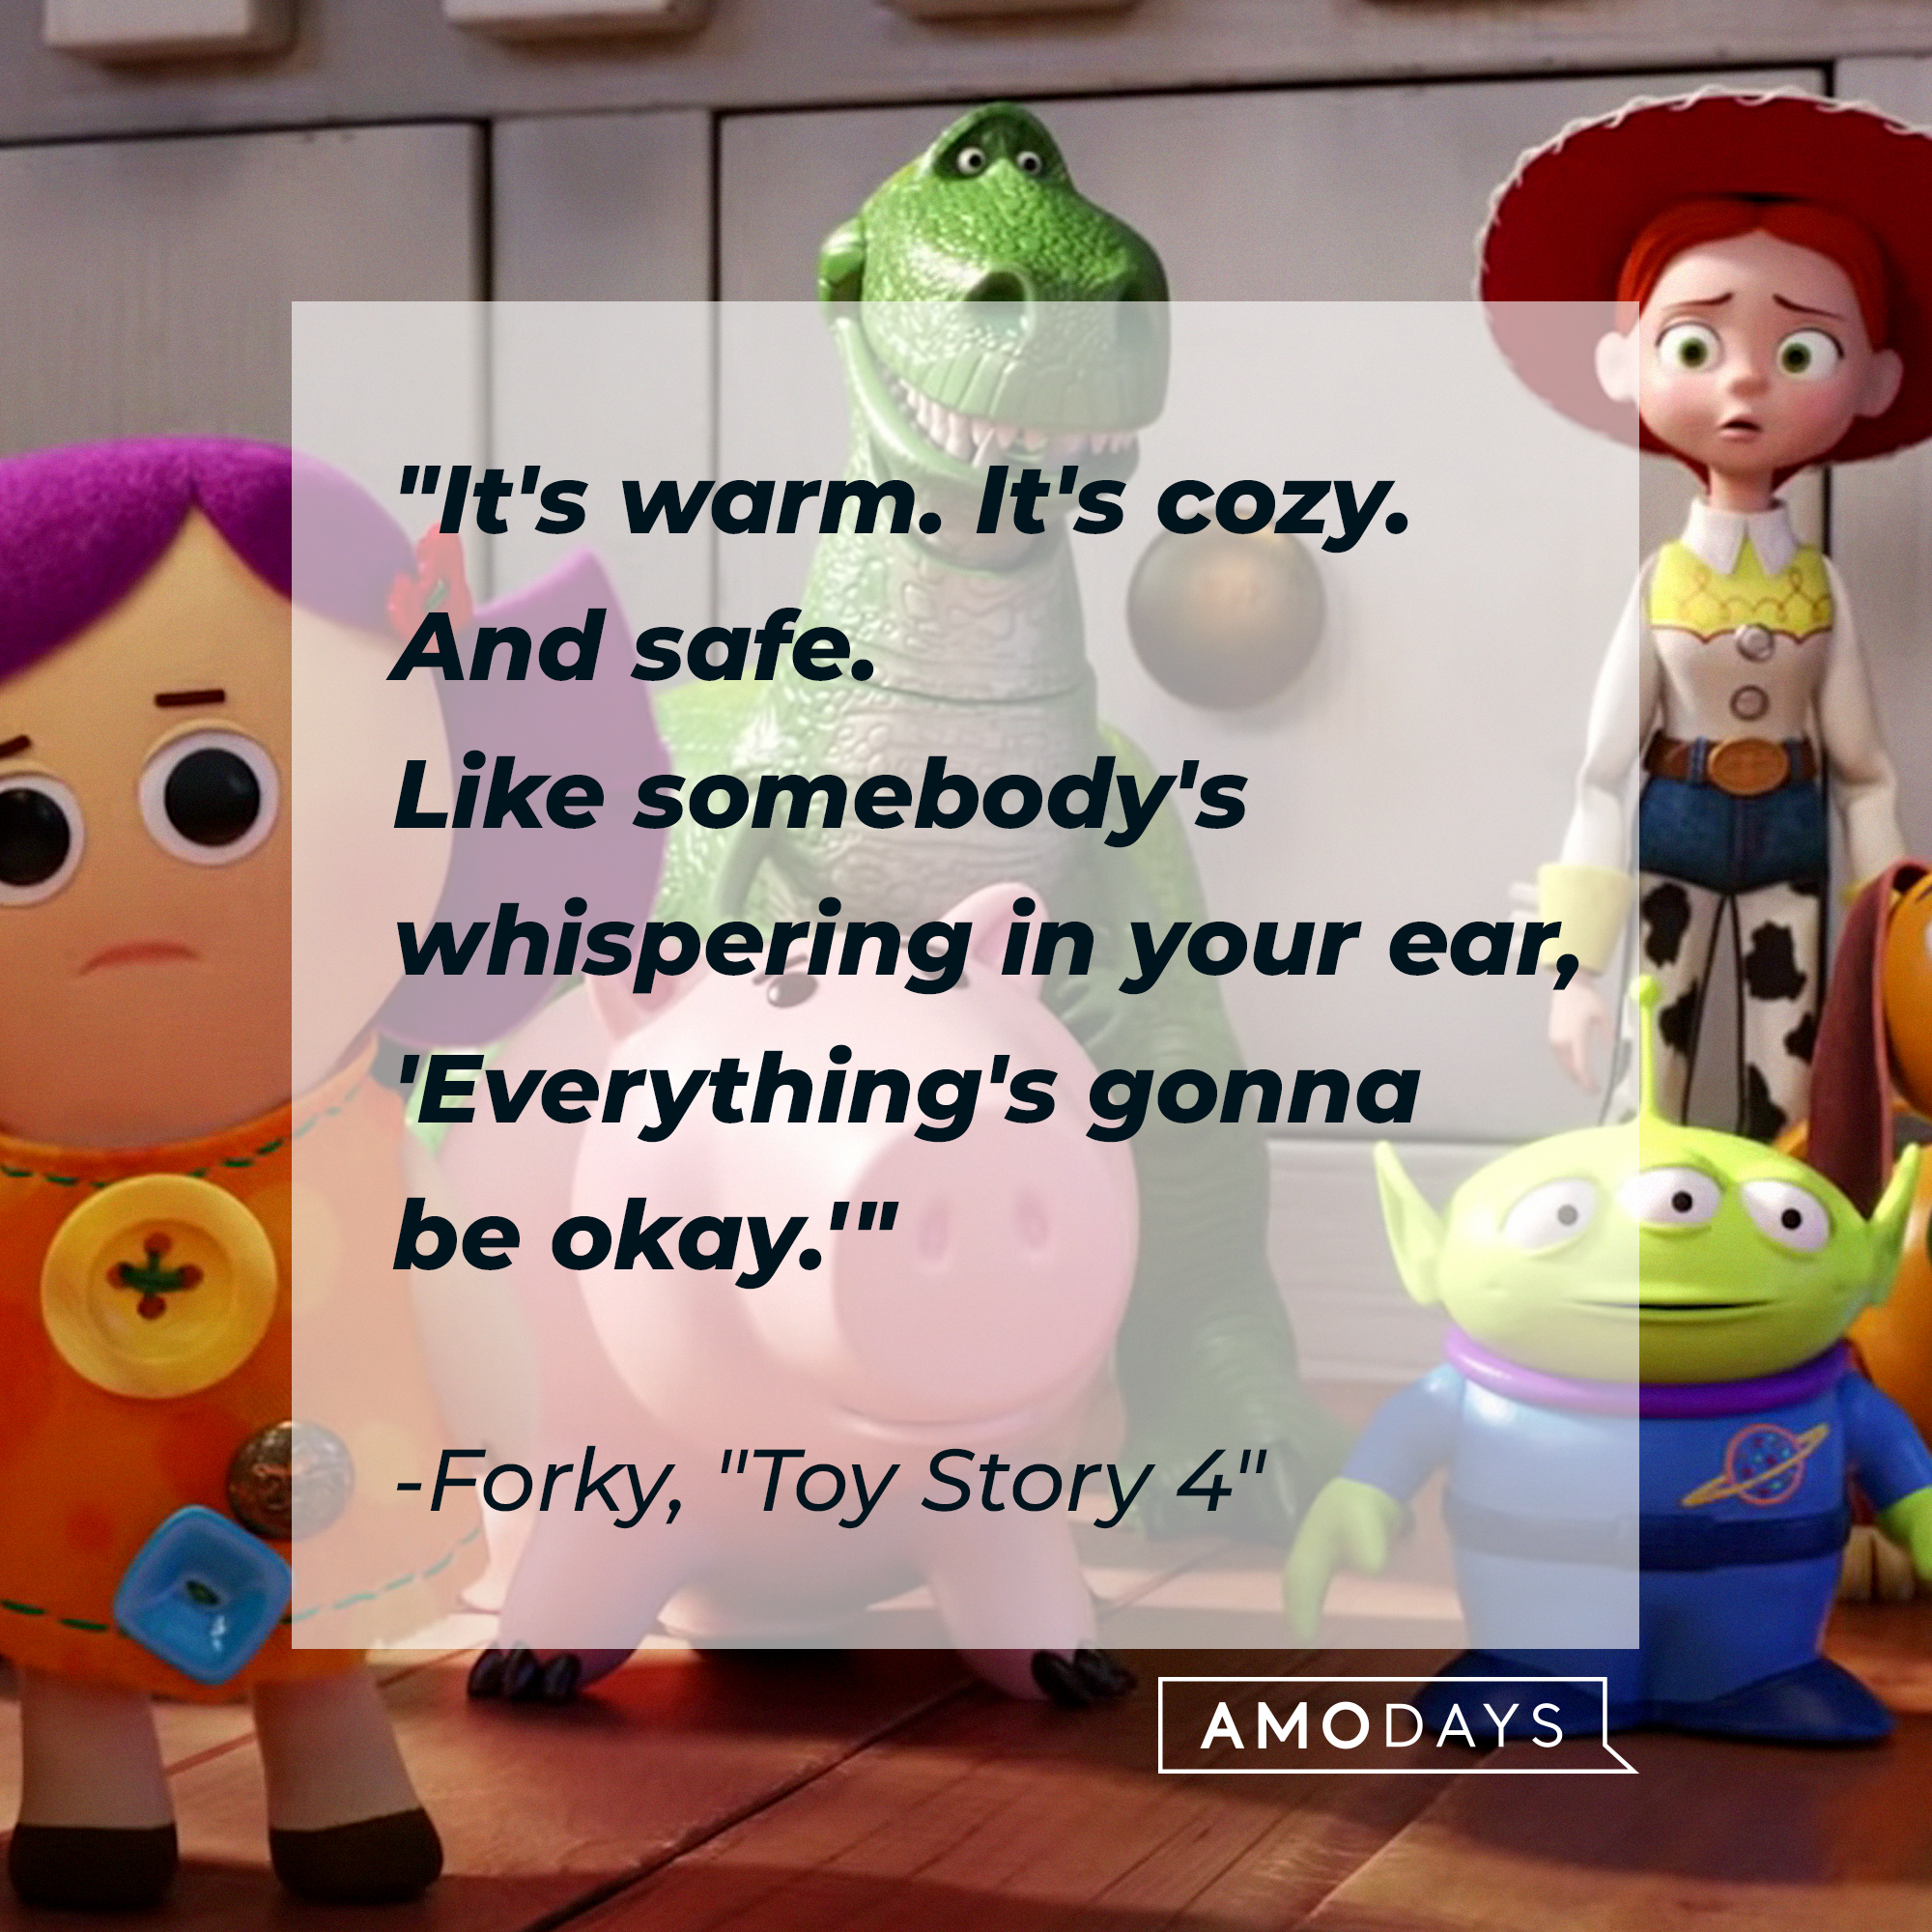 Forky's quote: "It's warm. It's cozy. And safe. Like somebody's whispering in your ear, 'Everything's gonna be okay.'" | Source: Youtube.com/Pixar